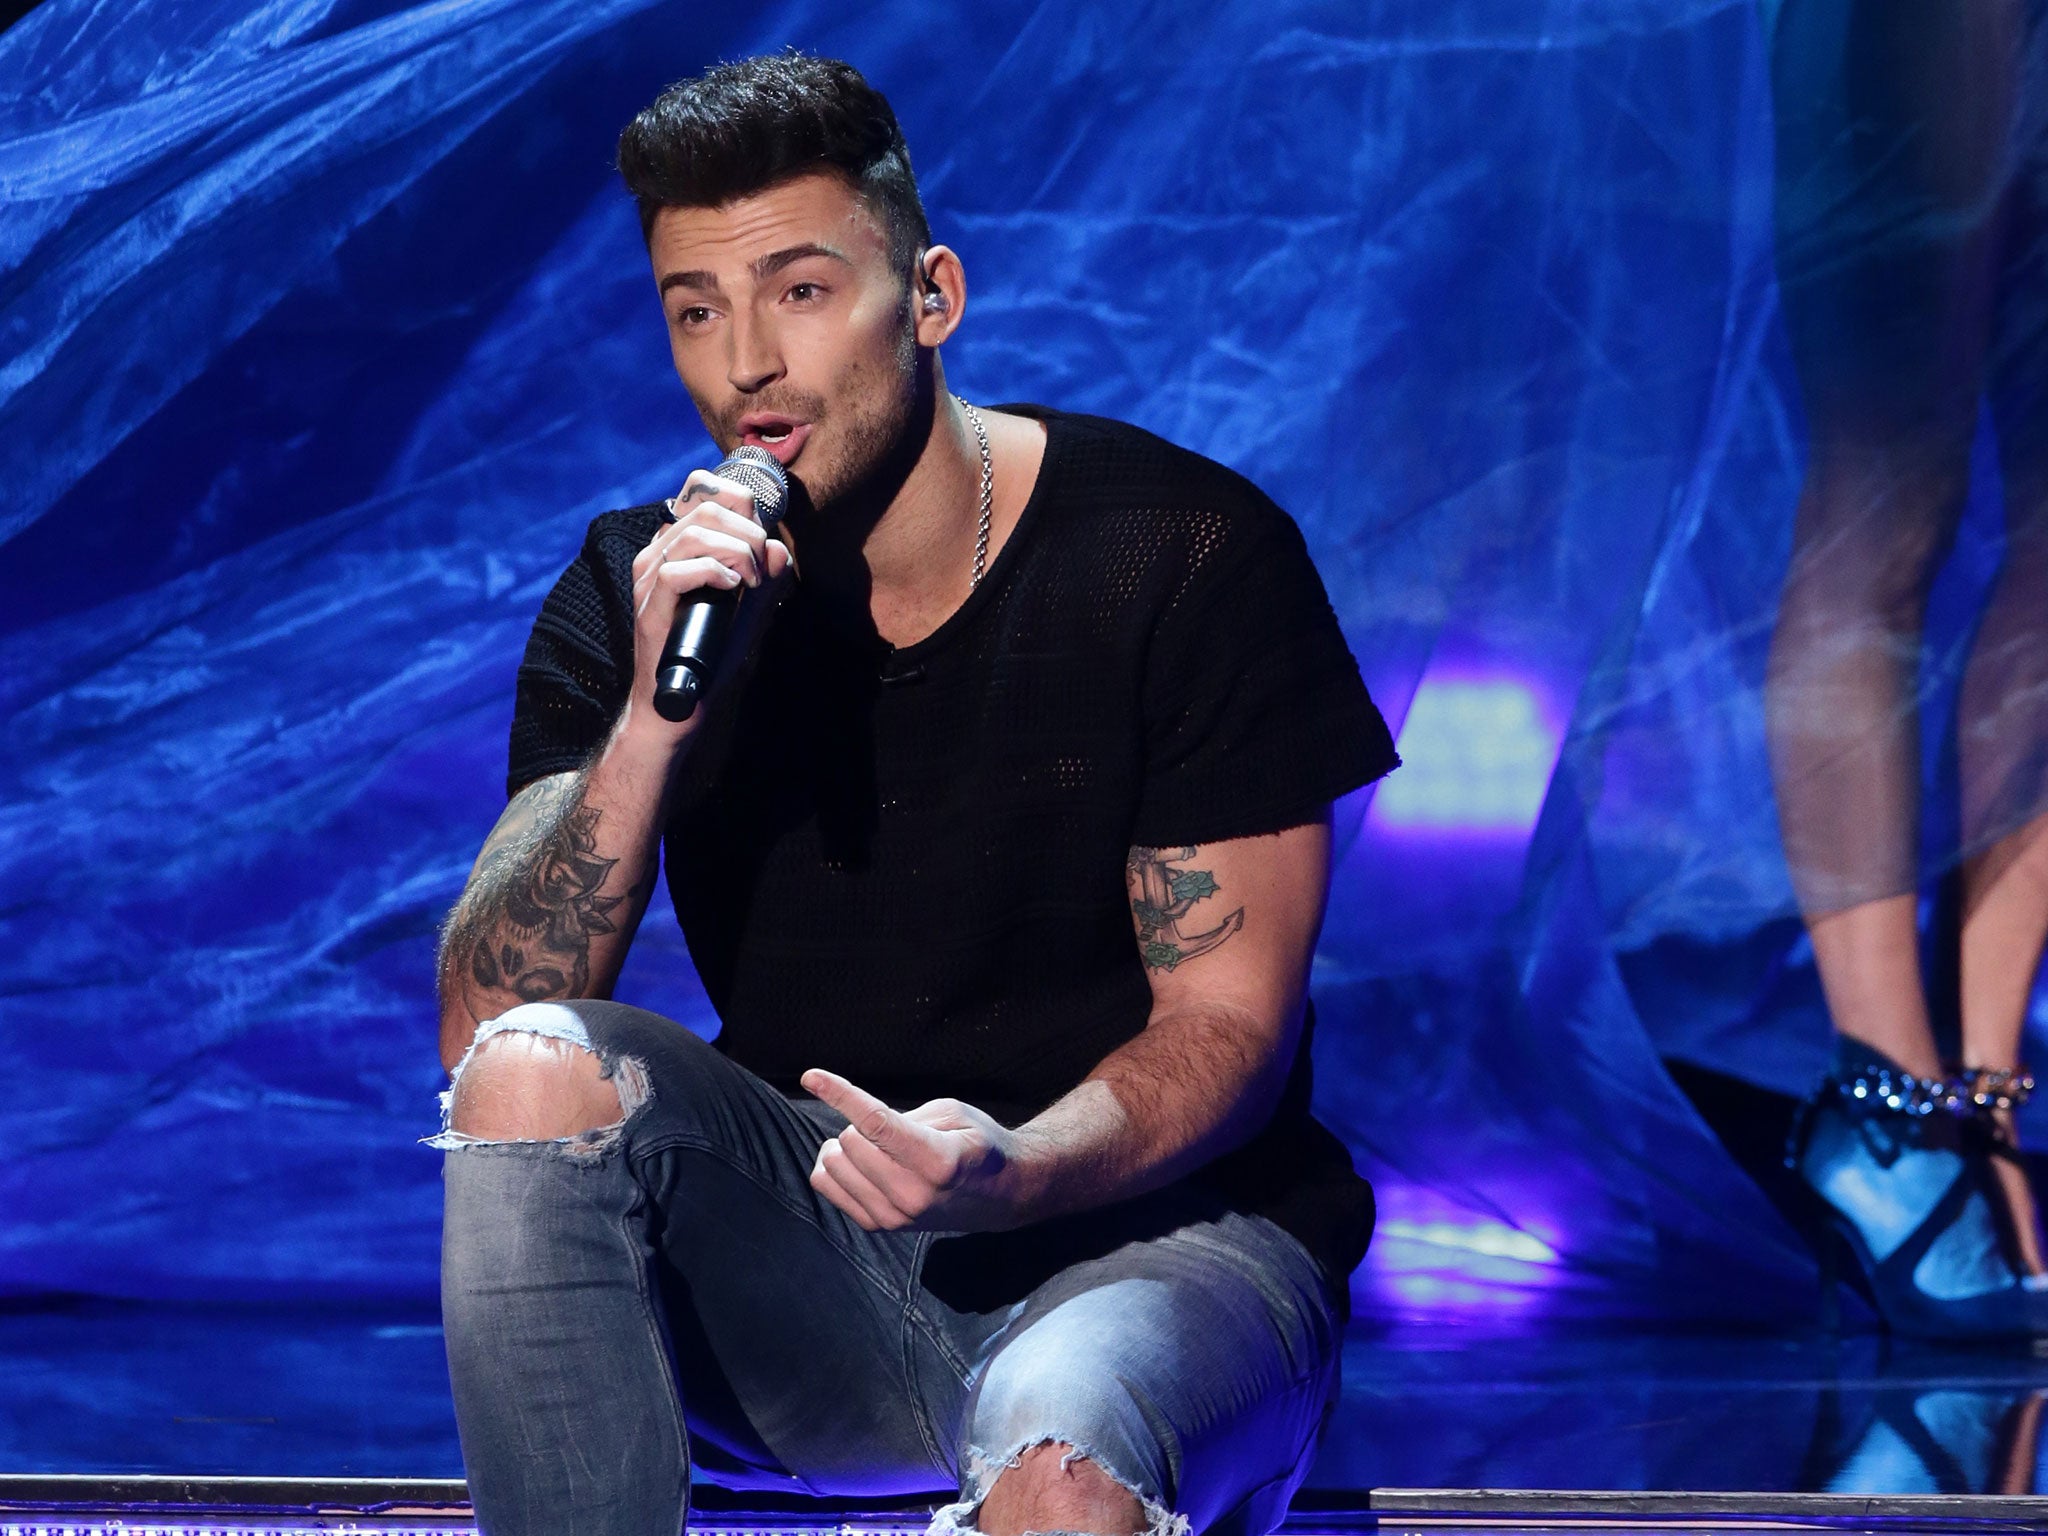 Jake Quickenden has become the fourth contestant to leave The X Factor 2014